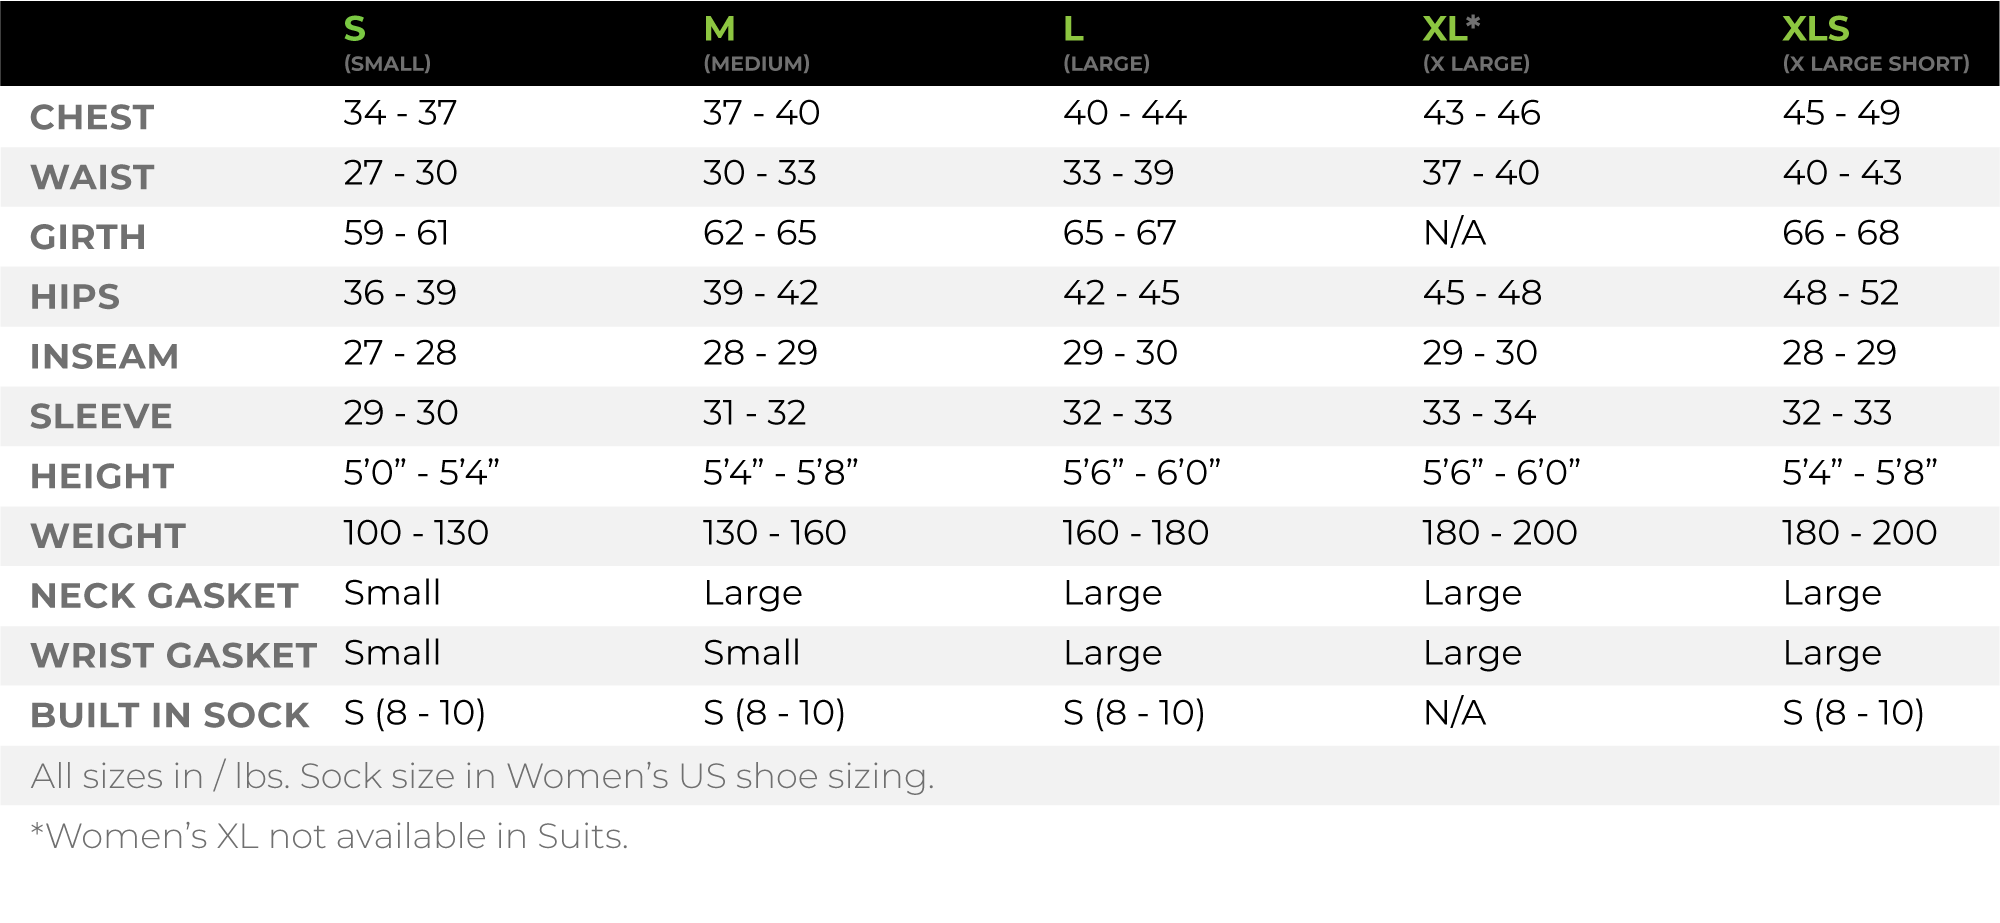 <table class="sizing-table">
<caption>
WOMEN'S SIZING CHART in INCHES. 
S (small)
chest	34 - 37
waist	27 - 30
girth	59 - 61
hips	36 - 39
inseam	27 - 28
sleeve	29 - 30
height	5’0” - 5’4”
weight	100 - 130
neck gasket	Small
wrist gasket	Small
built in sock	S (8 - 10)
M (medium)
chest	37 - 40
waist	30 - 33
girth	62 - 65
hips	39 - 42
inseam	28 - 29
sleeve	31 - 32
height	5’4” - 5’8”
weight	130 - 160
neck gasket	Large
wrist gasket	Small
built in sock	S (8 - 10)
L (large)
chest	40 - 44
waist	33 - 39
girth	65 - 67
hips	42 - 45
inseam	29 - 30
sleeve	32 - 33
height	5’6” - 6’0”
weight	160 - 180
neck gasket	Large
wrist gasket	Large
built in sock	S (8 - 10)
XL (x large)
chest	43 - 46
waist	37 - 40
girth	N/A
hips	45 - 48
inseam	29 - 30
sleeve	33 - 34
height	5’6” - 6’0”
weight	180 - 200
neck gasket	Large
wrist gasket	Large
built in sock	N/A
XLS (x large short)
chest	45 - 49
waist	40 - 43
girth	66 - 68
hips	48 - 52
inseam	28 - 29
sleeve	32 - 33
height	5’4” - 5’8”
weight	180 - 200
neck gasket	Large
wrist gasket	Large
built in sock	S (8 - 10)
All sizes inches / pounds. Sock size in Women’s U.S. shoe sizing. 
*Women’s X.L. not available in Suits.
</caption>
</table>